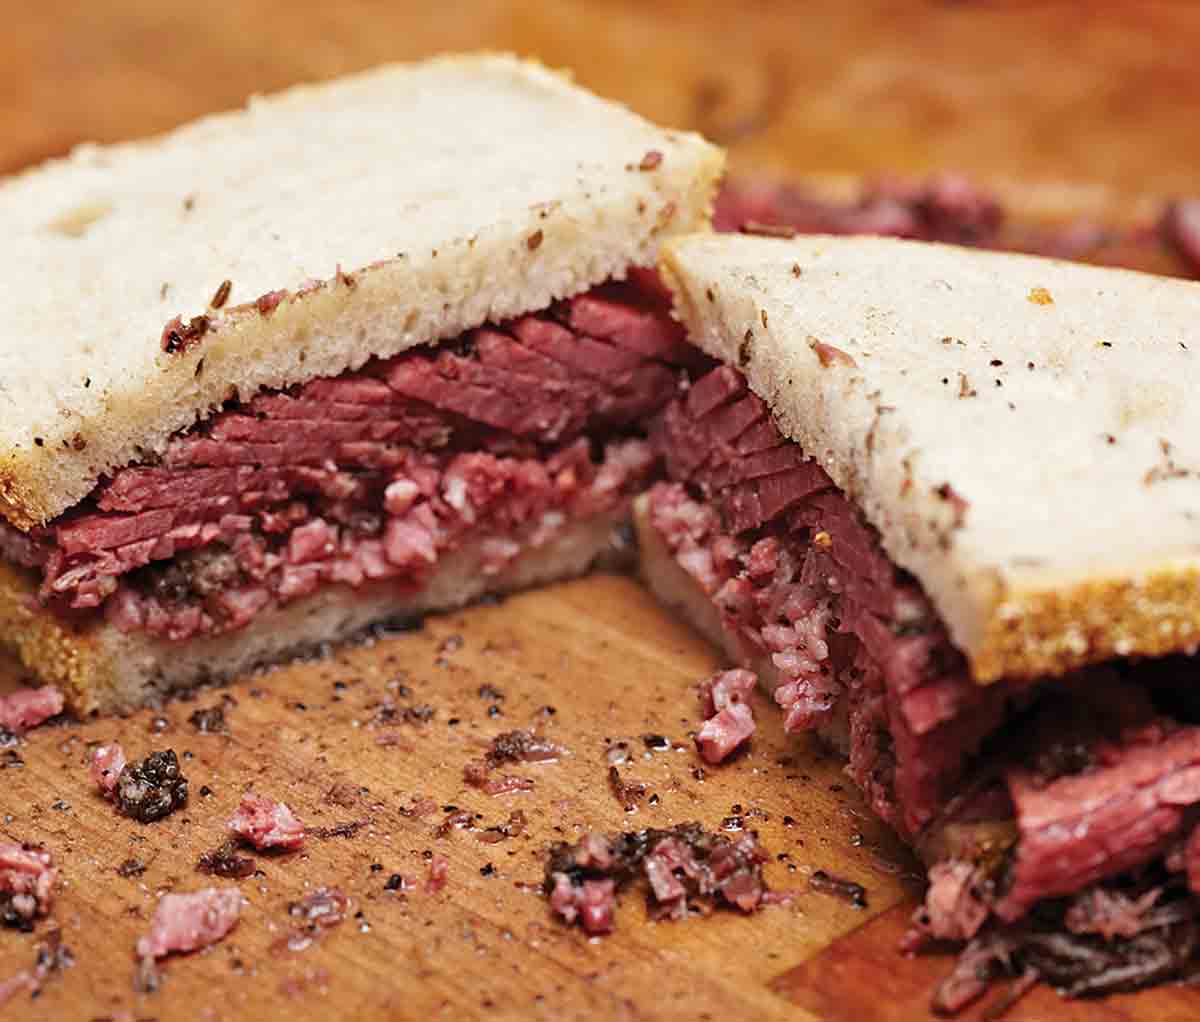 A pastrami sandwich mad with white bread and thinly sliced pastrami on a wooden cutting board.